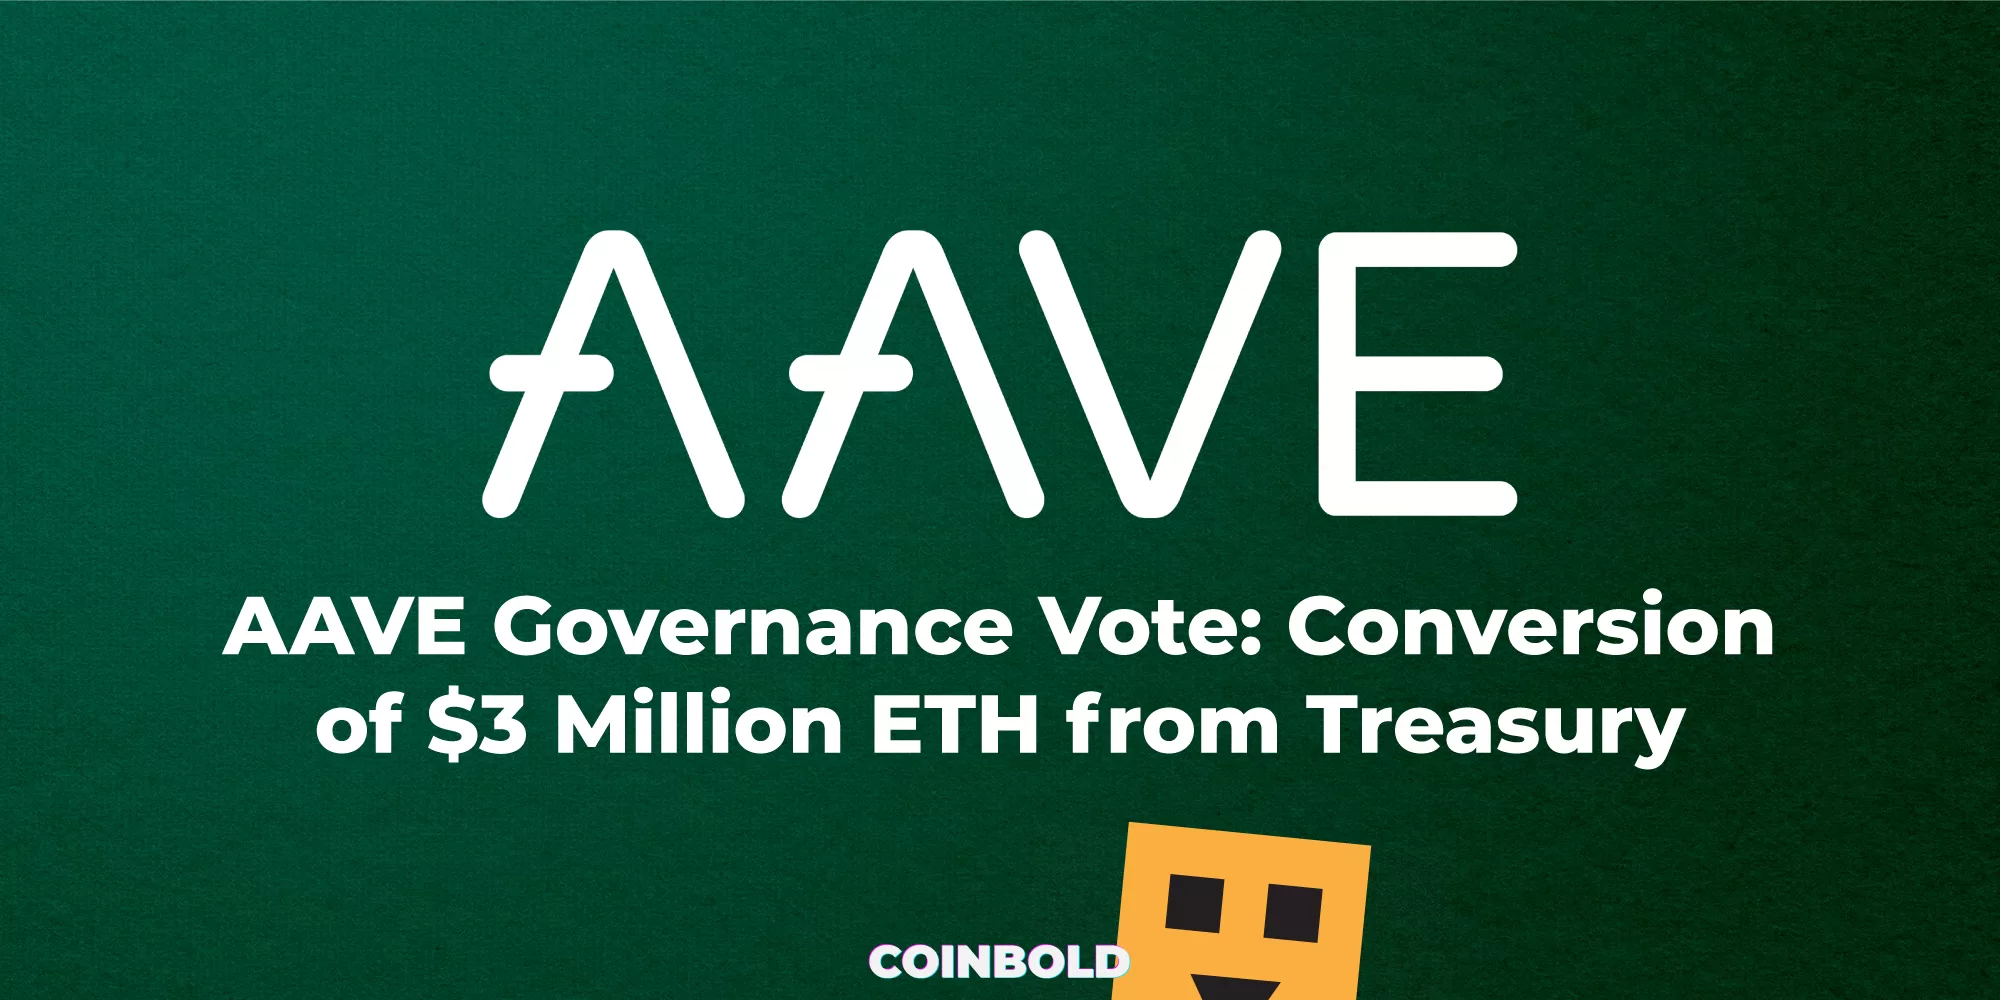 AAVE Governance Vote: Conversion of $3 Million ETH from Treasury